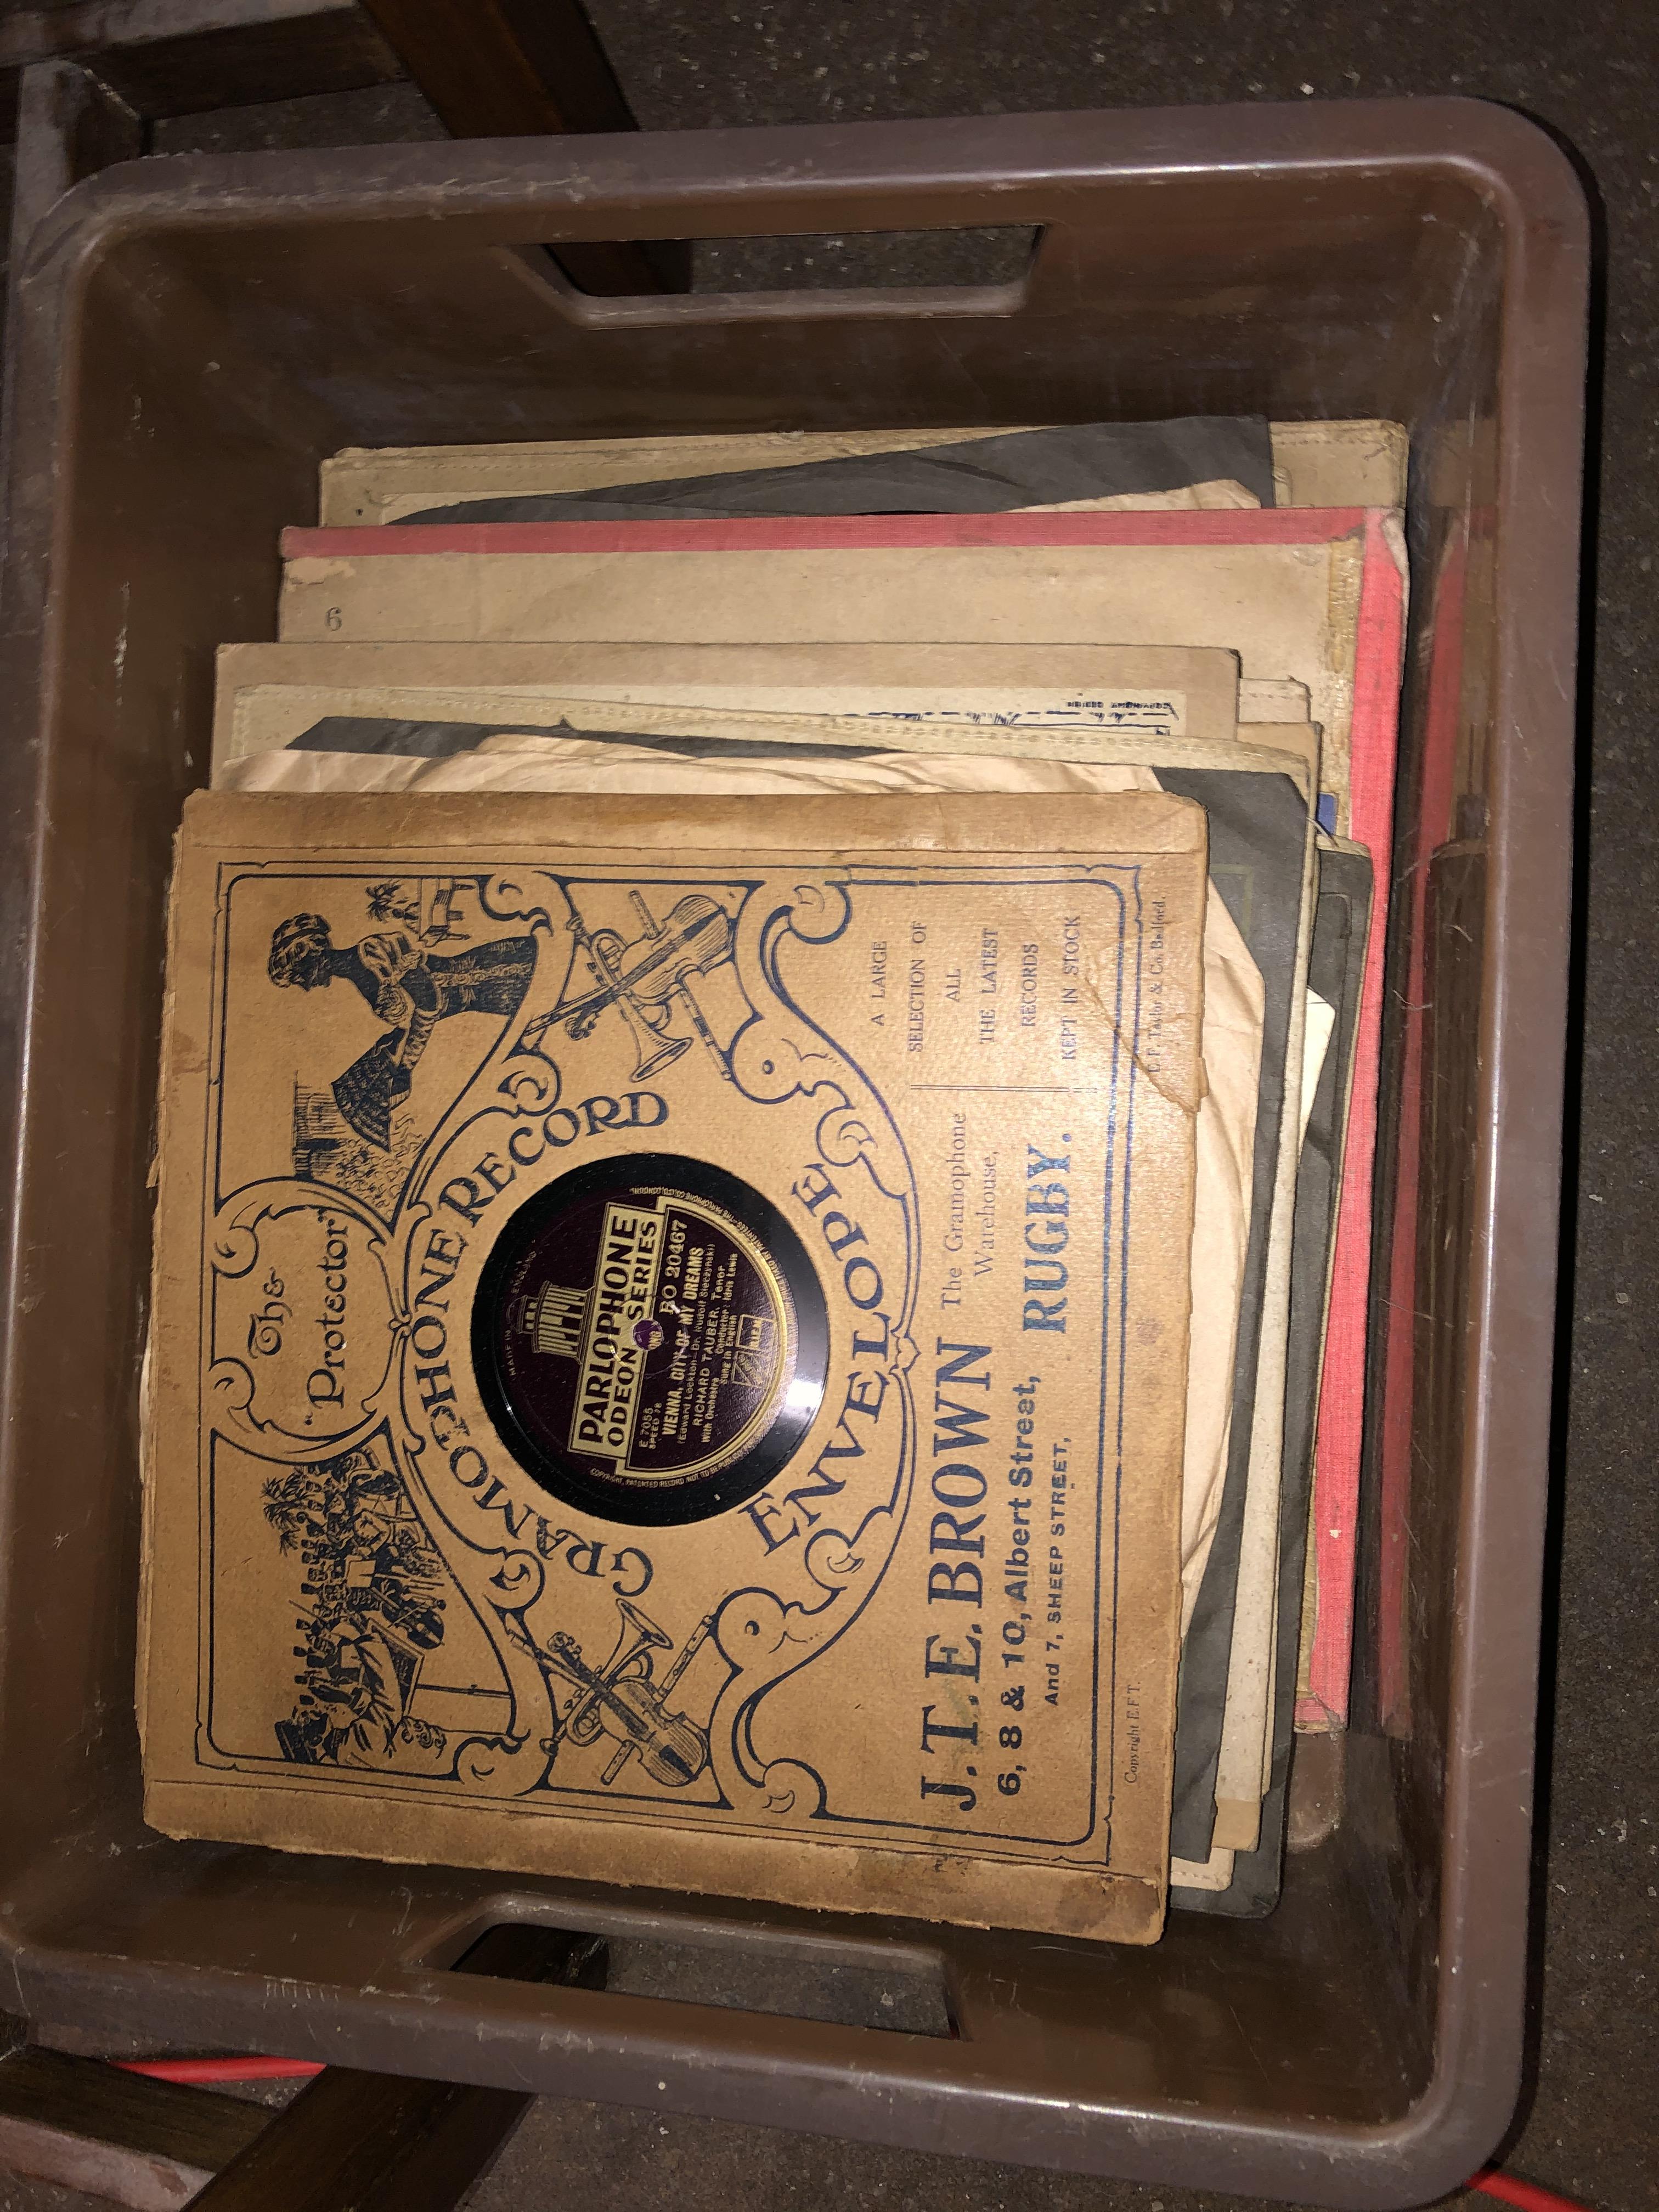 OAK CASED ACADEMY WIND UP TABLE TOP GRAMOPHONE -HANDLE AND BOX OF 78RPM RECORDS - Image 6 of 7